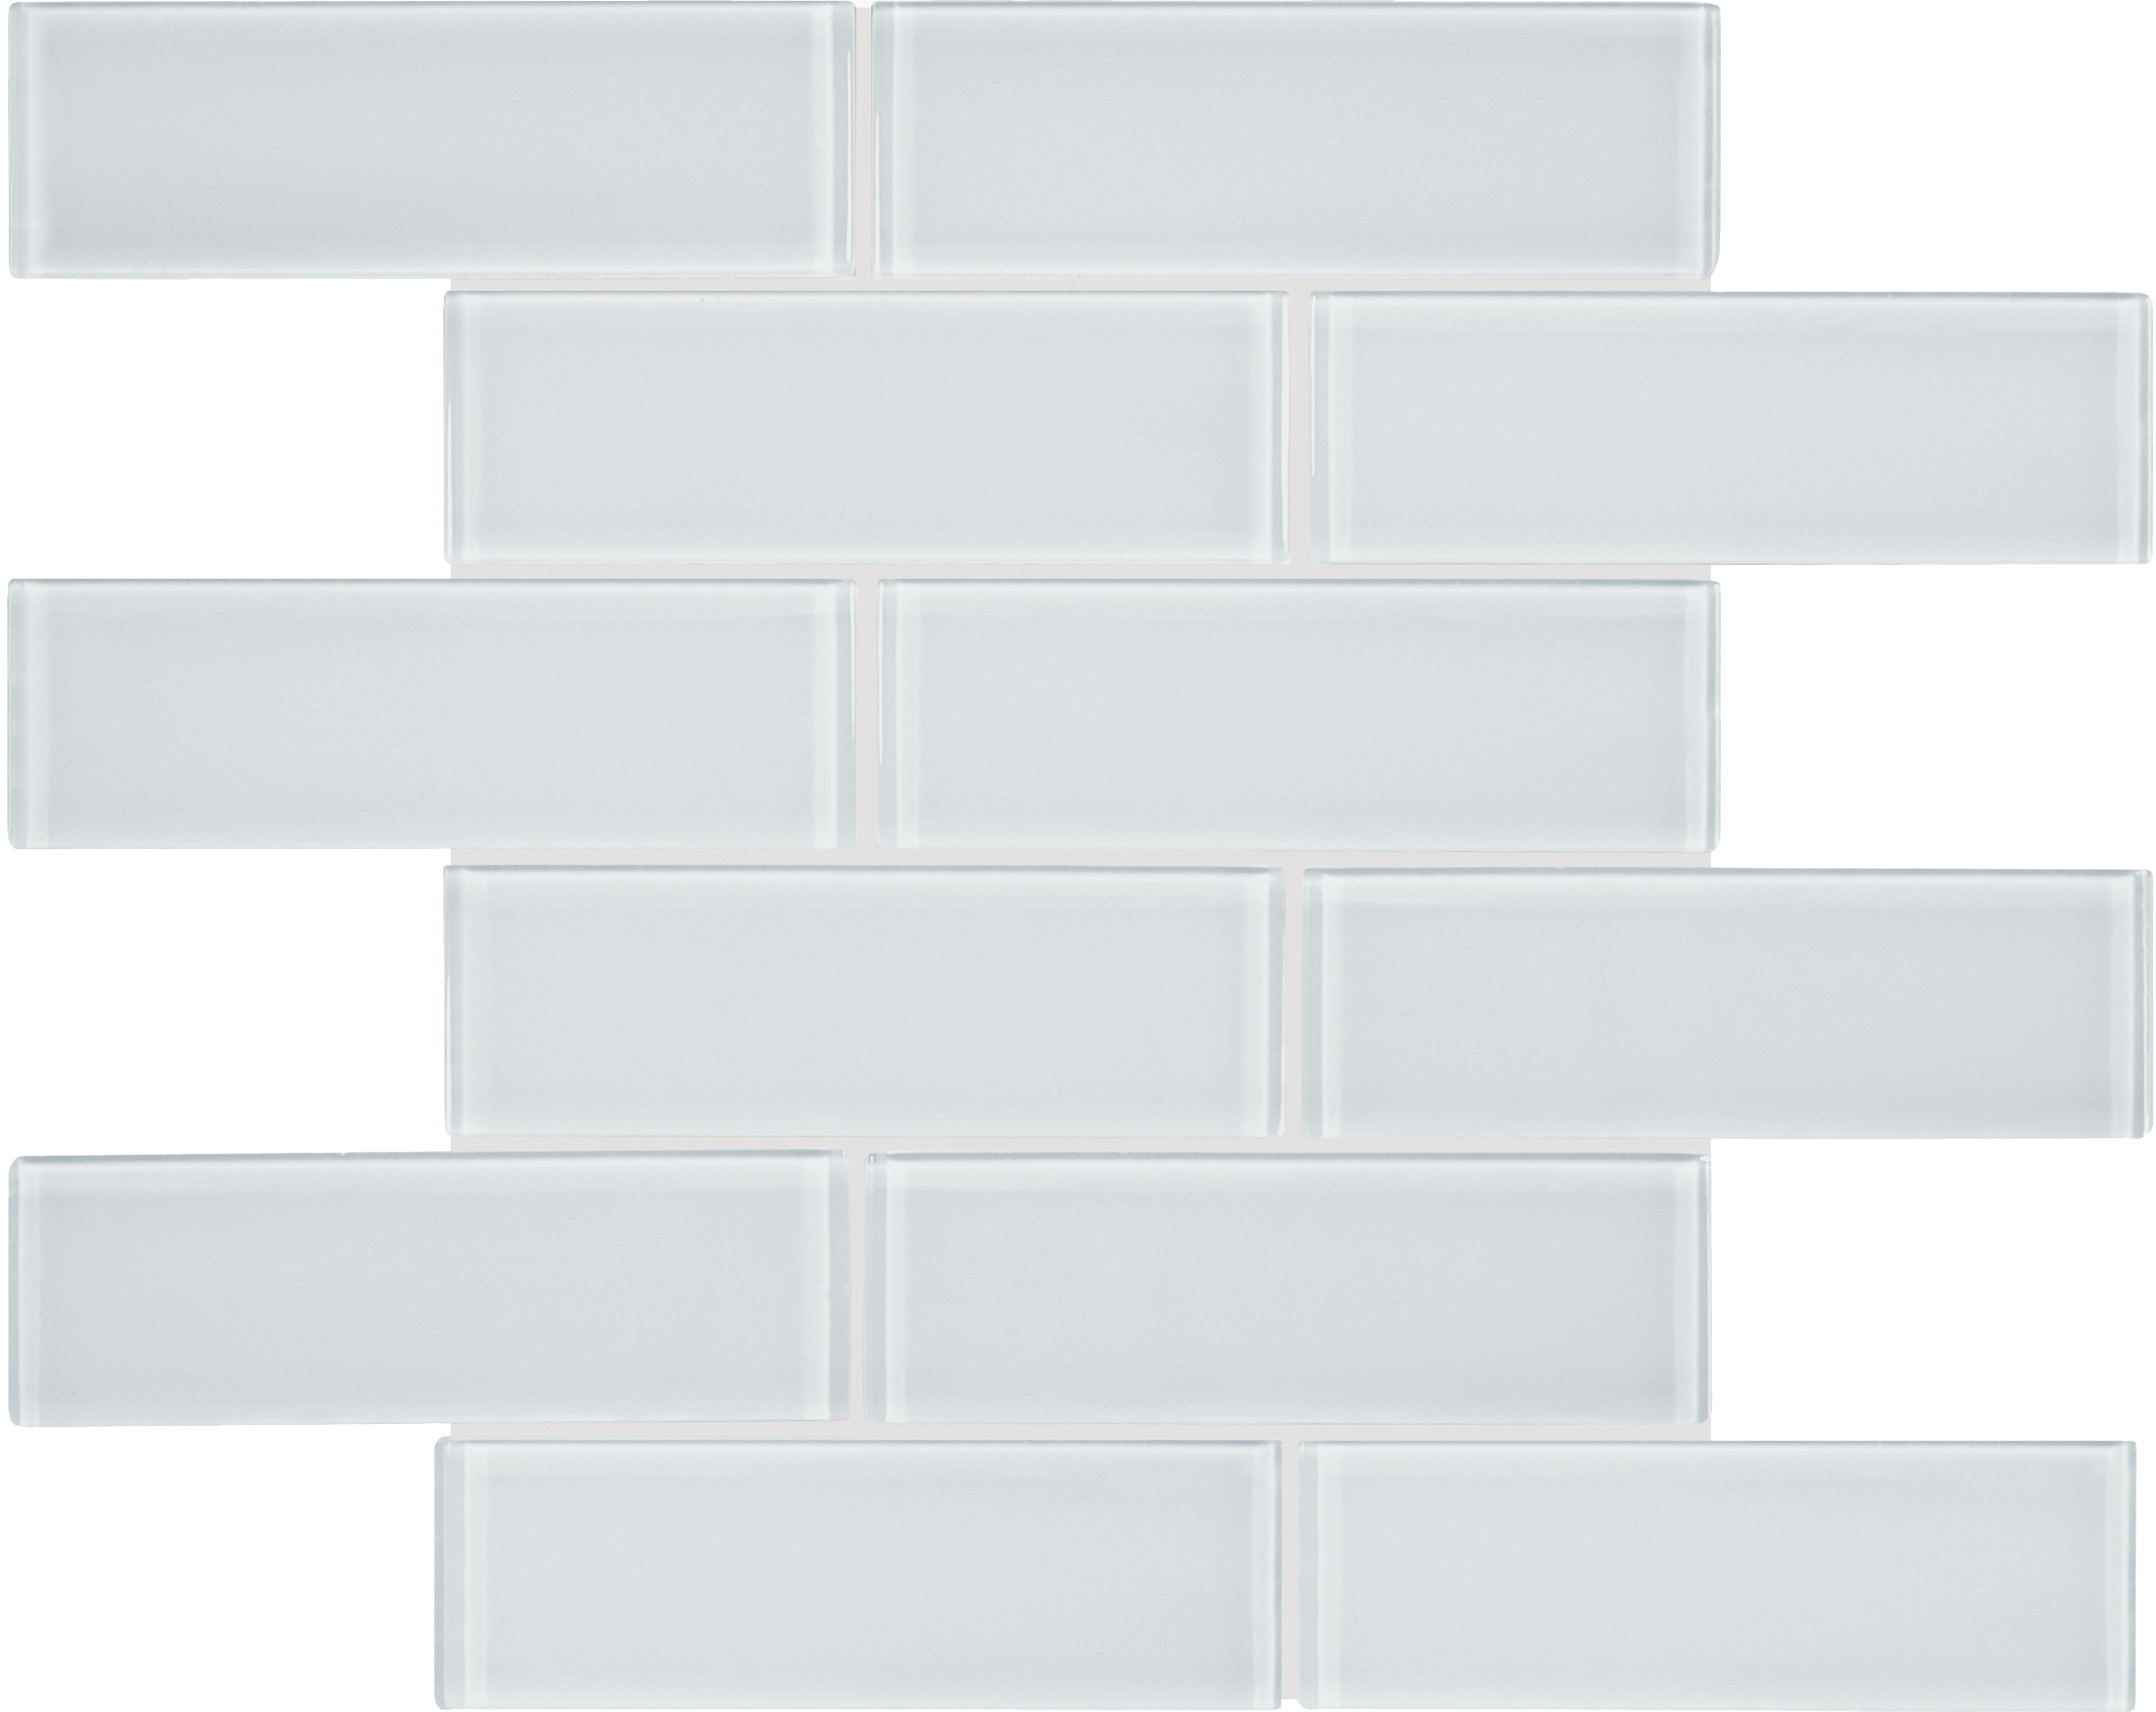 ice brick offset 2x6-inch pattern fused glass mosaic from element anatolia collection distributed by surface group international glossy finish rounded edge mesh shape